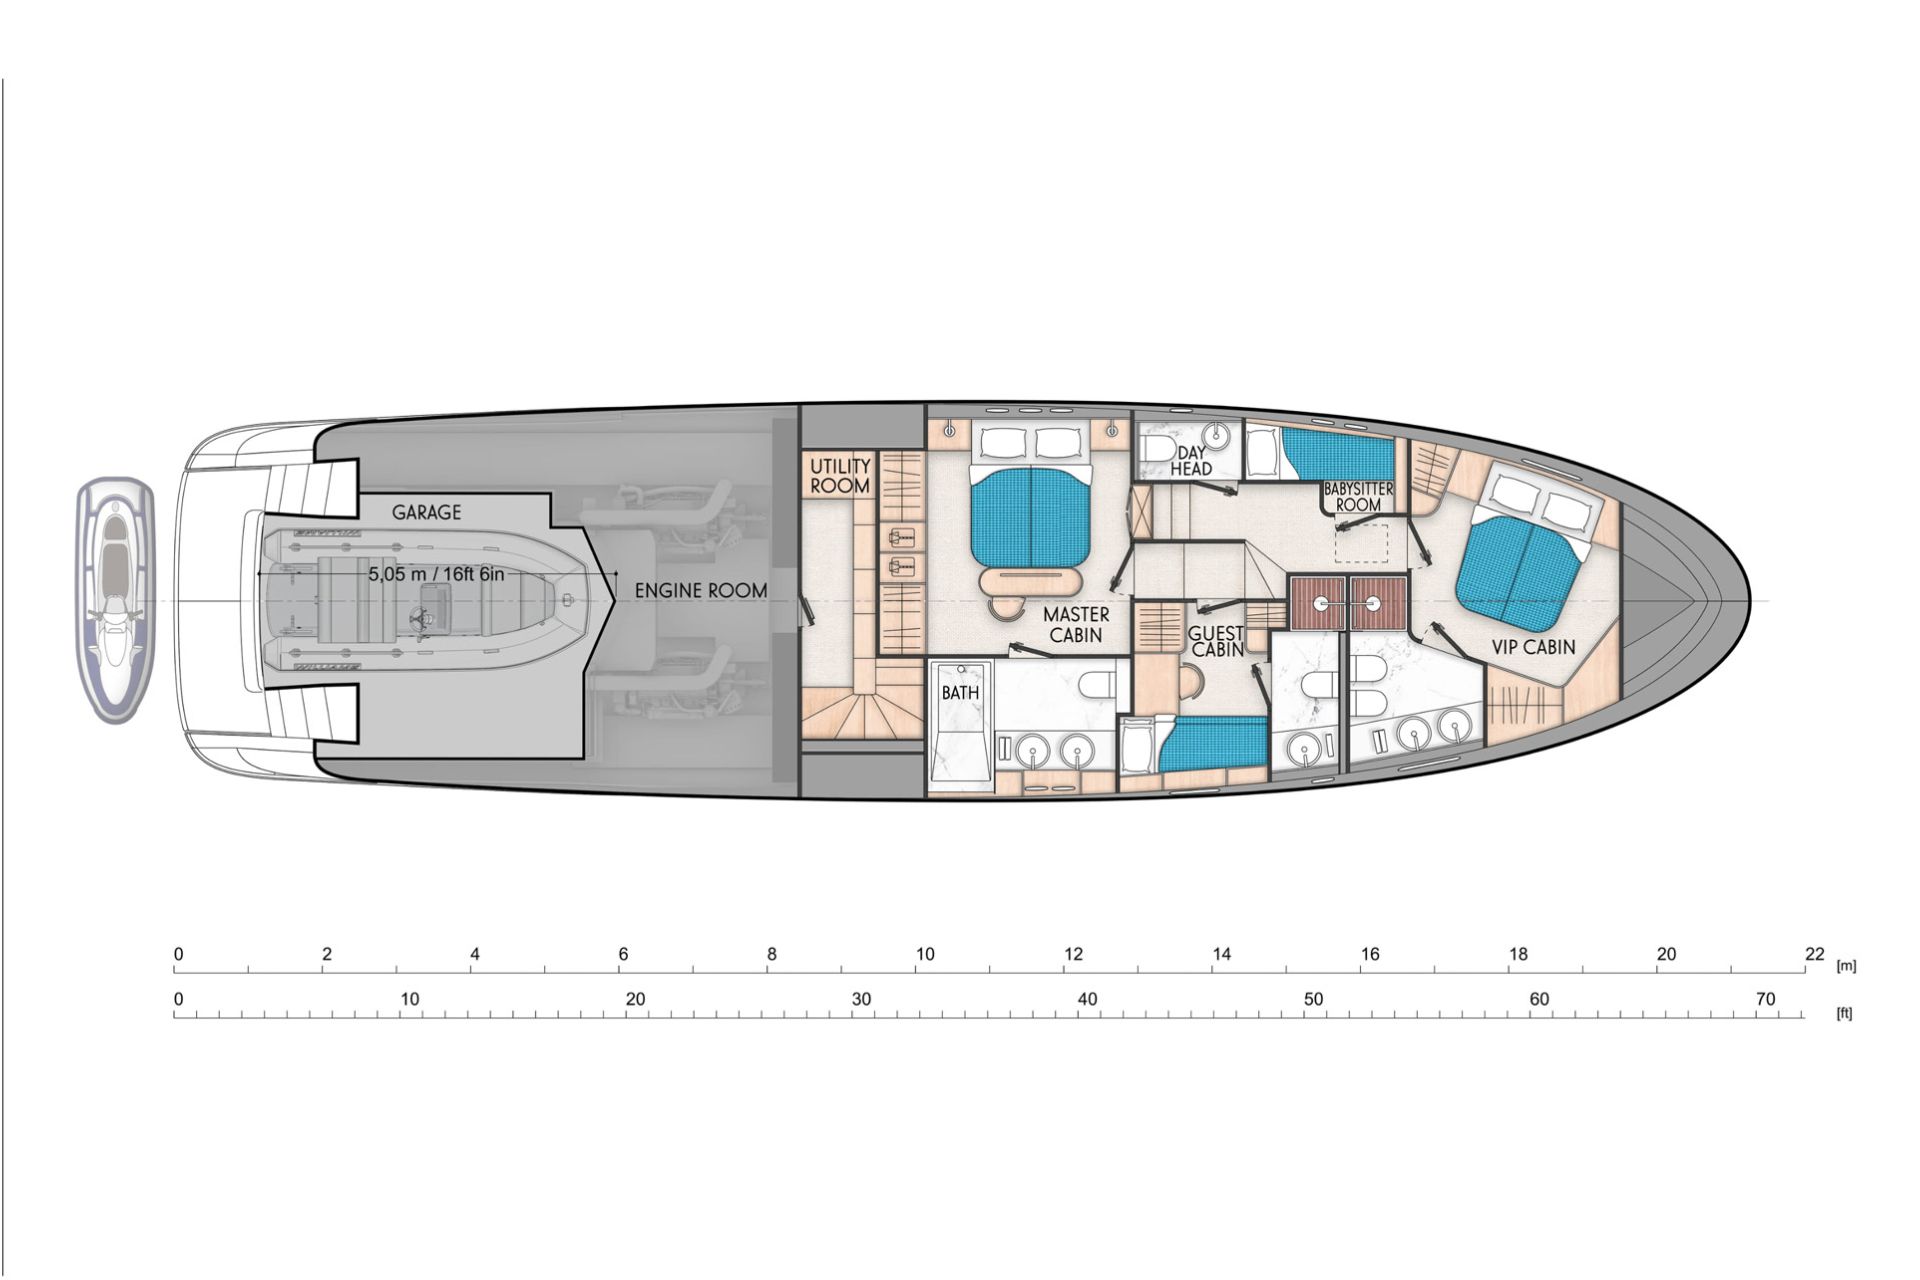 Lower deck type A No.4 with galley on the main deck. Cabin for babysitter. Utility room could be replaced for the crew cabin/2nd guest like in the Lowerdeck3 layout.